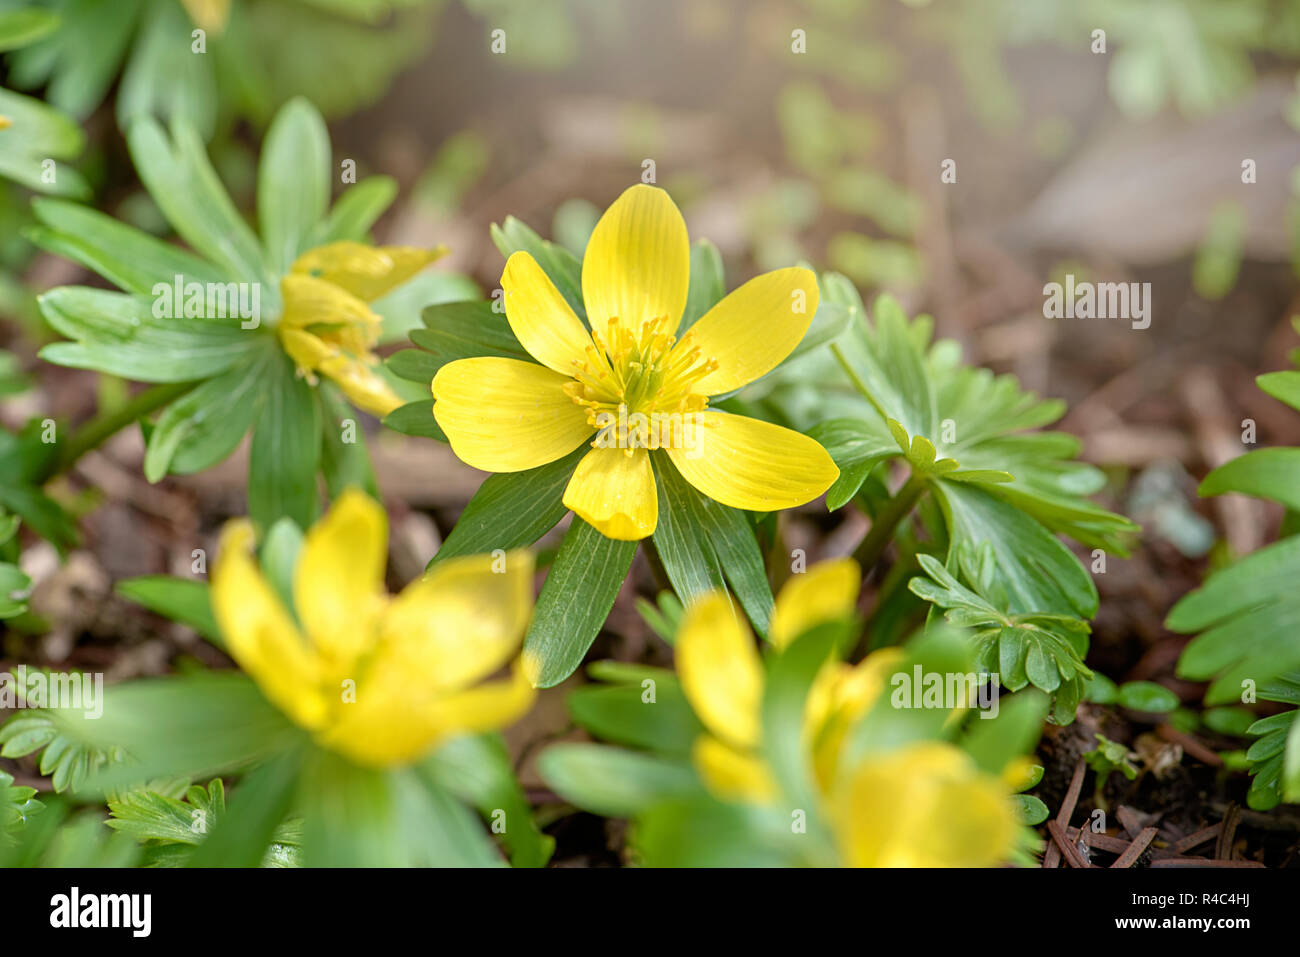 Close-up image of the beautiful spring flowering Anemone ranunculoides also known as wood ginger or yellow anemone.or Buttercup Anemone Stock Photo